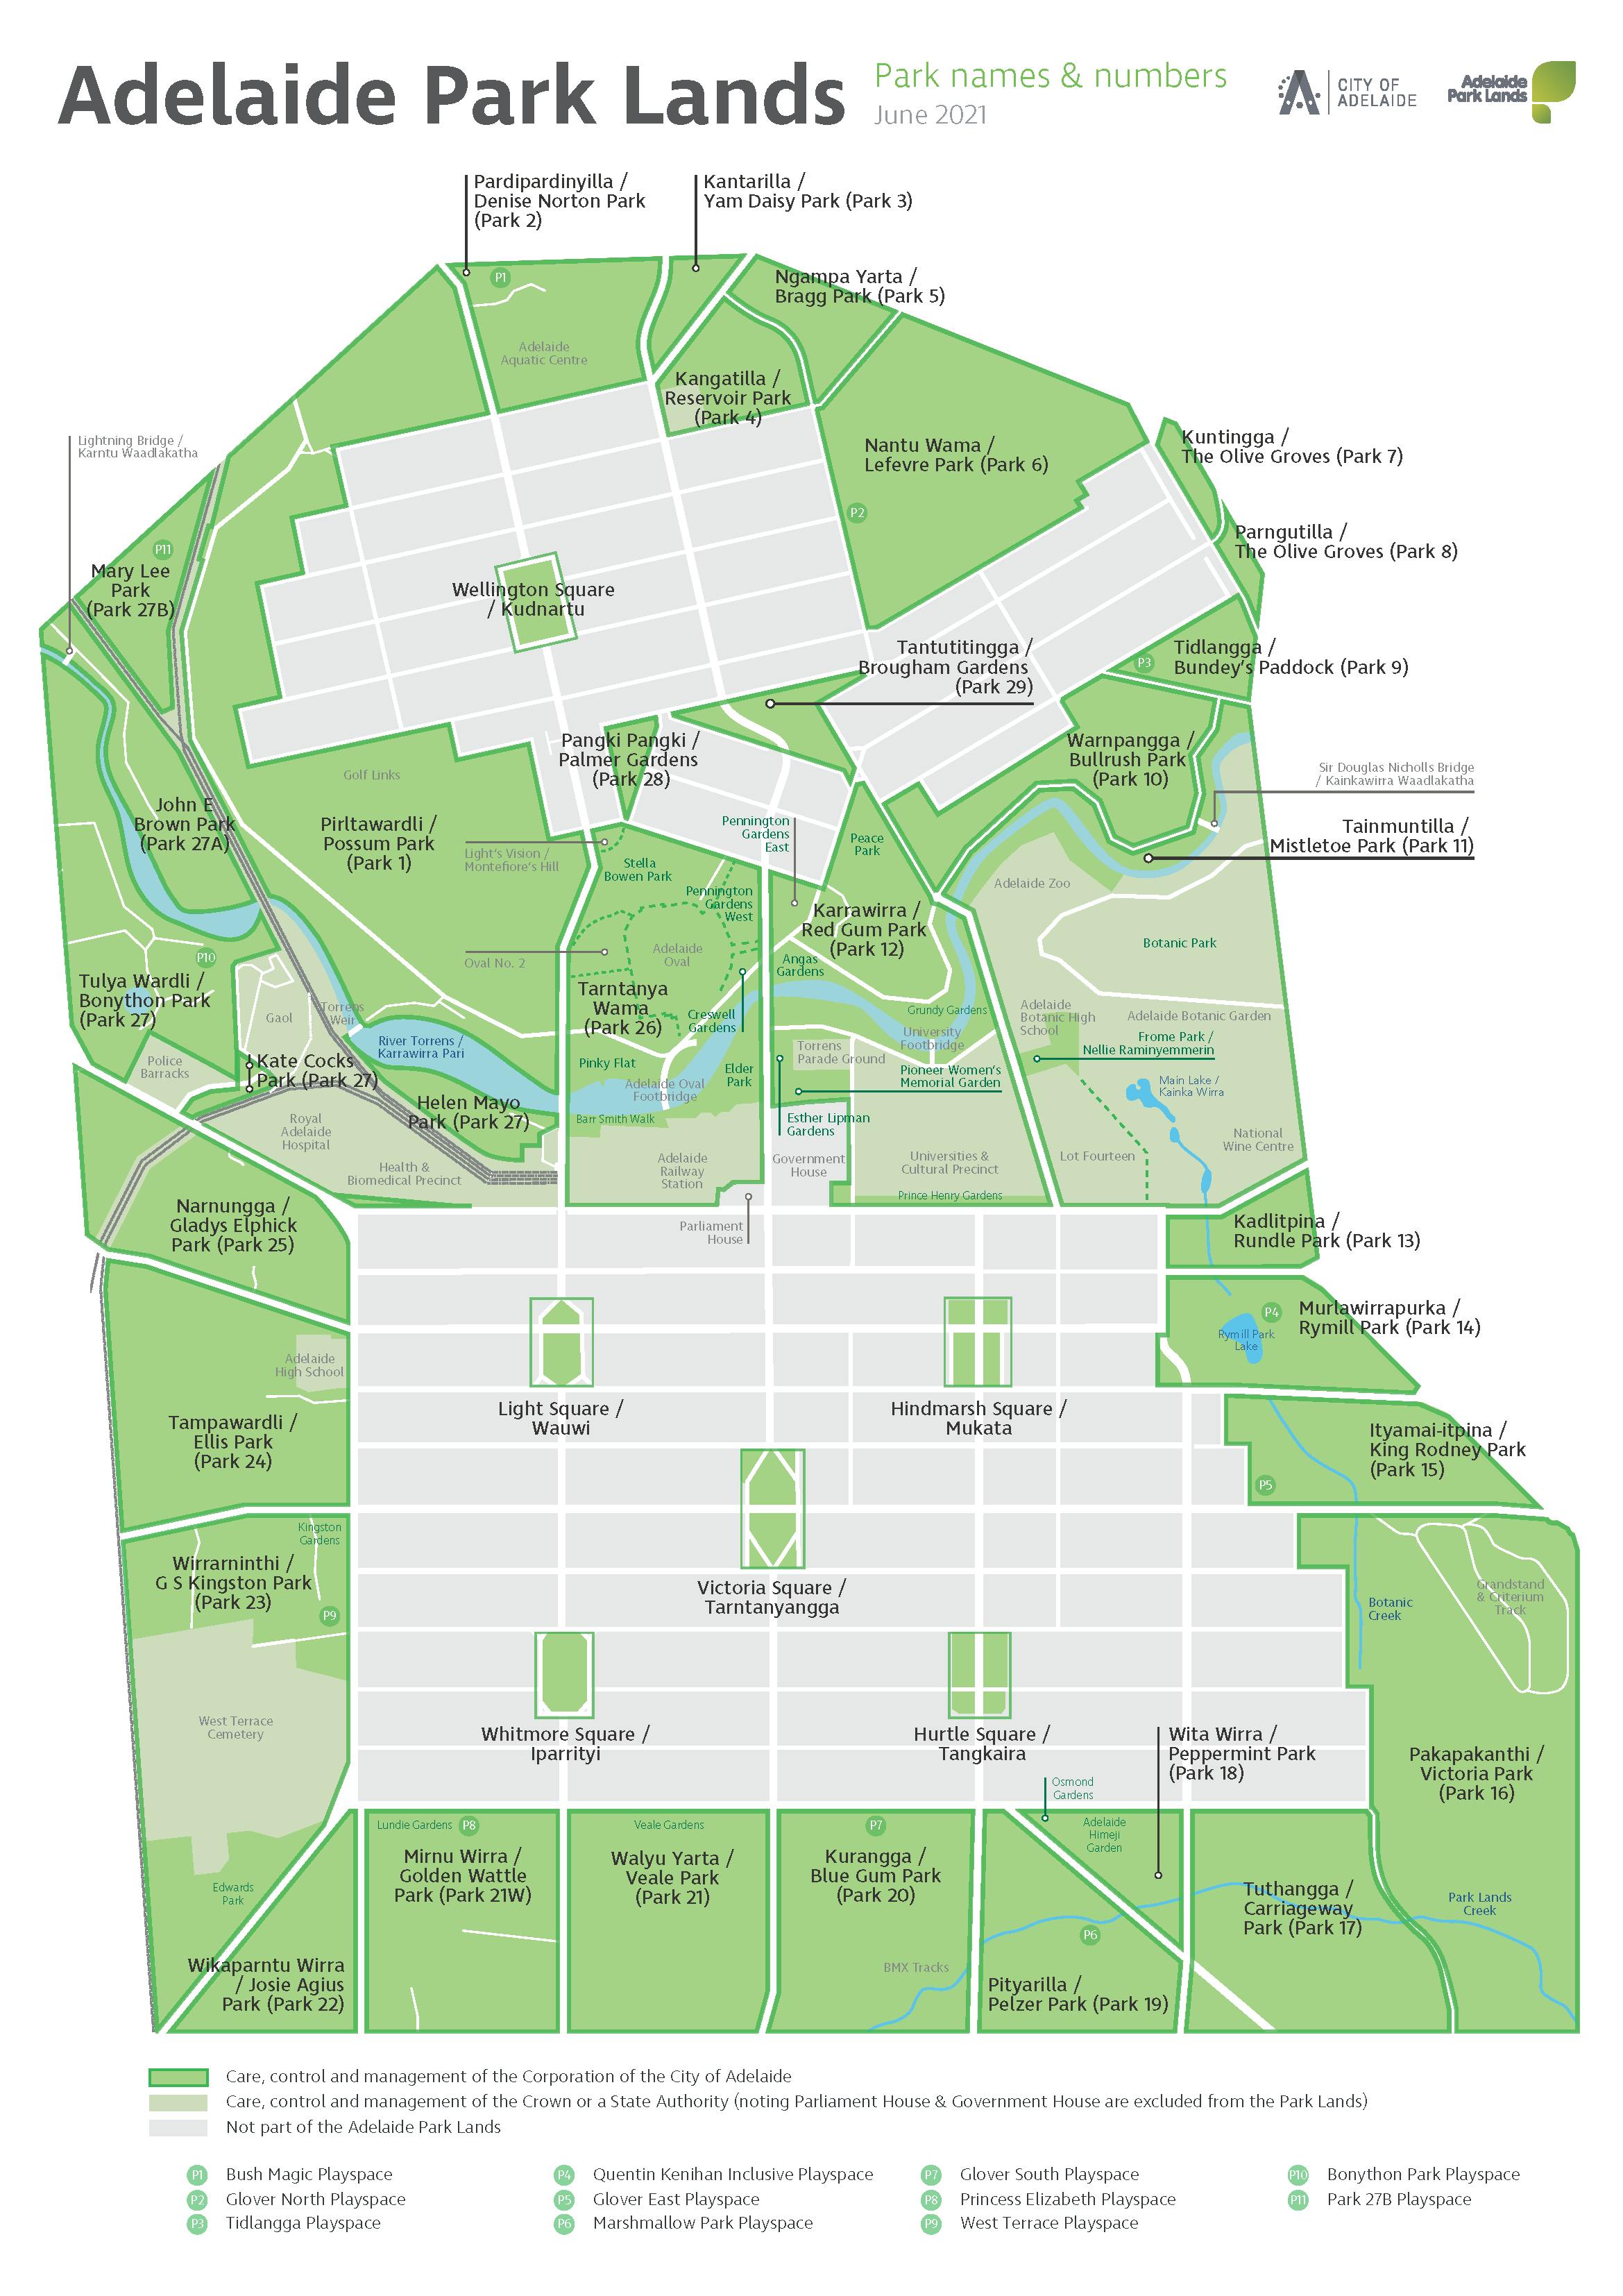 Map of Park Lands Names & Features